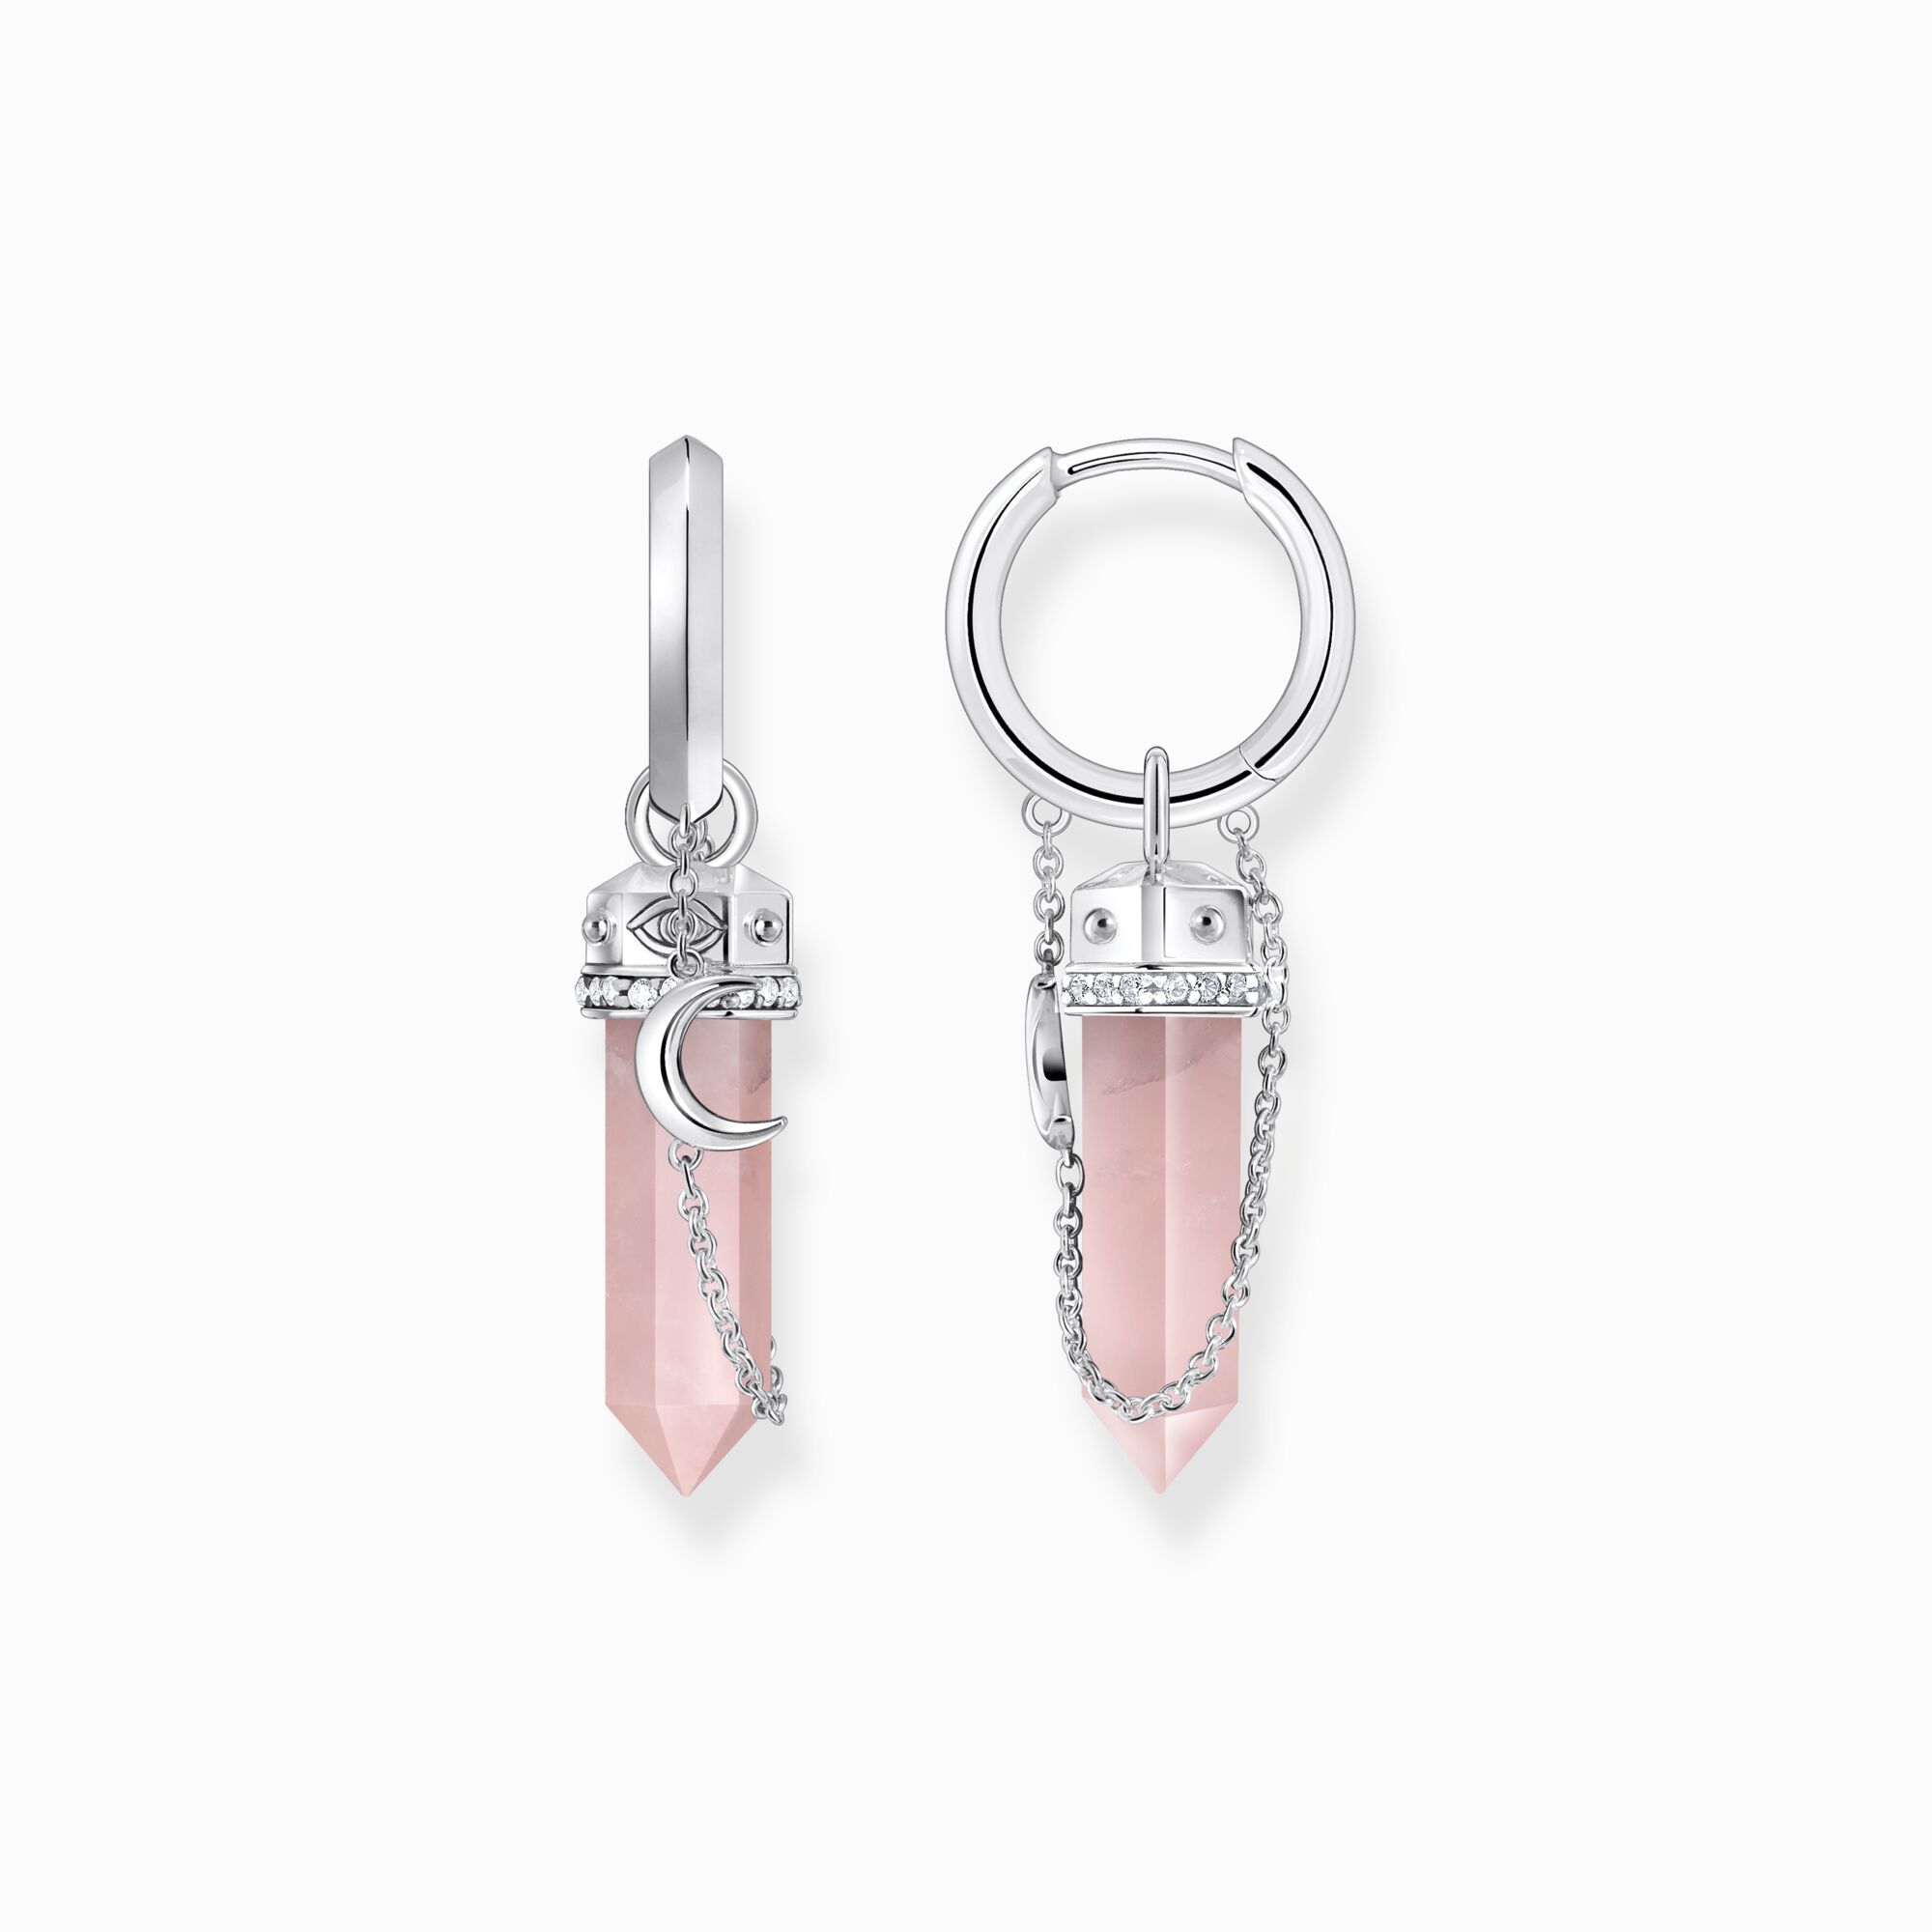 Silver hexagonal hoop earring with rose quartz from the  collection in the THOMAS SABO online store